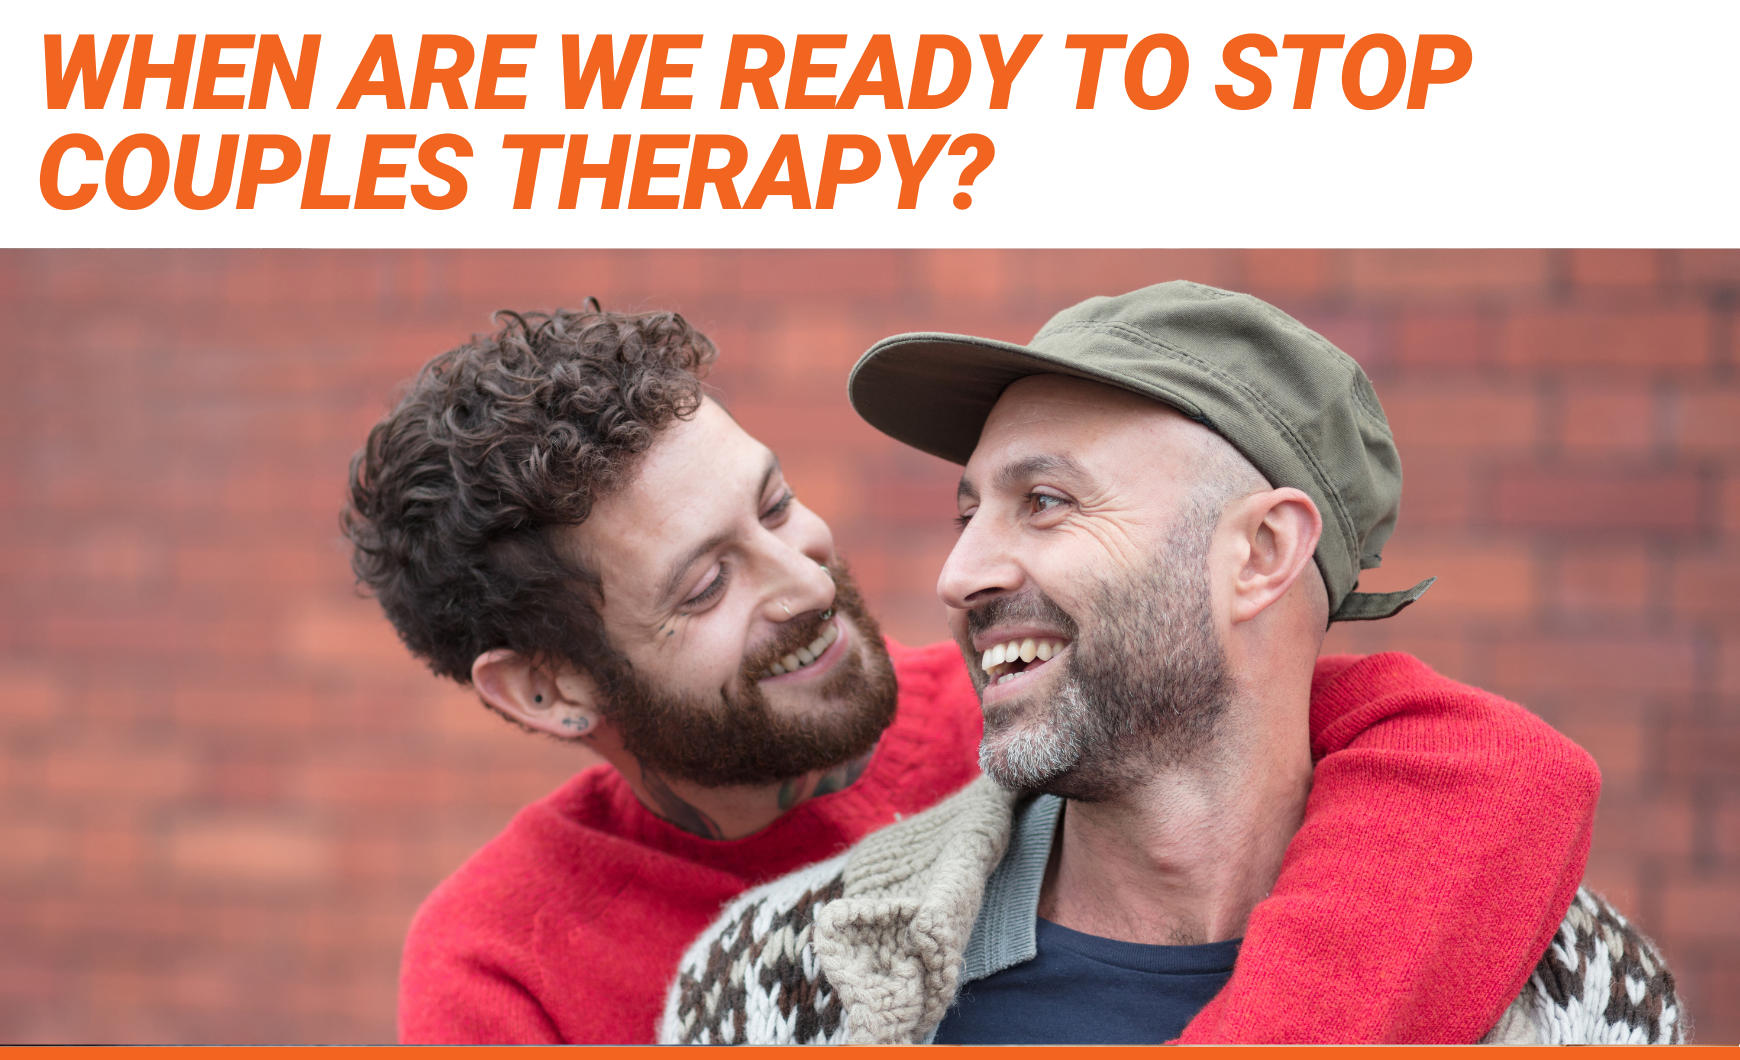 Orange text that reads "When are we ready to stop couples therapy?" above a stock photo of a white gay couple smiling and embracing.